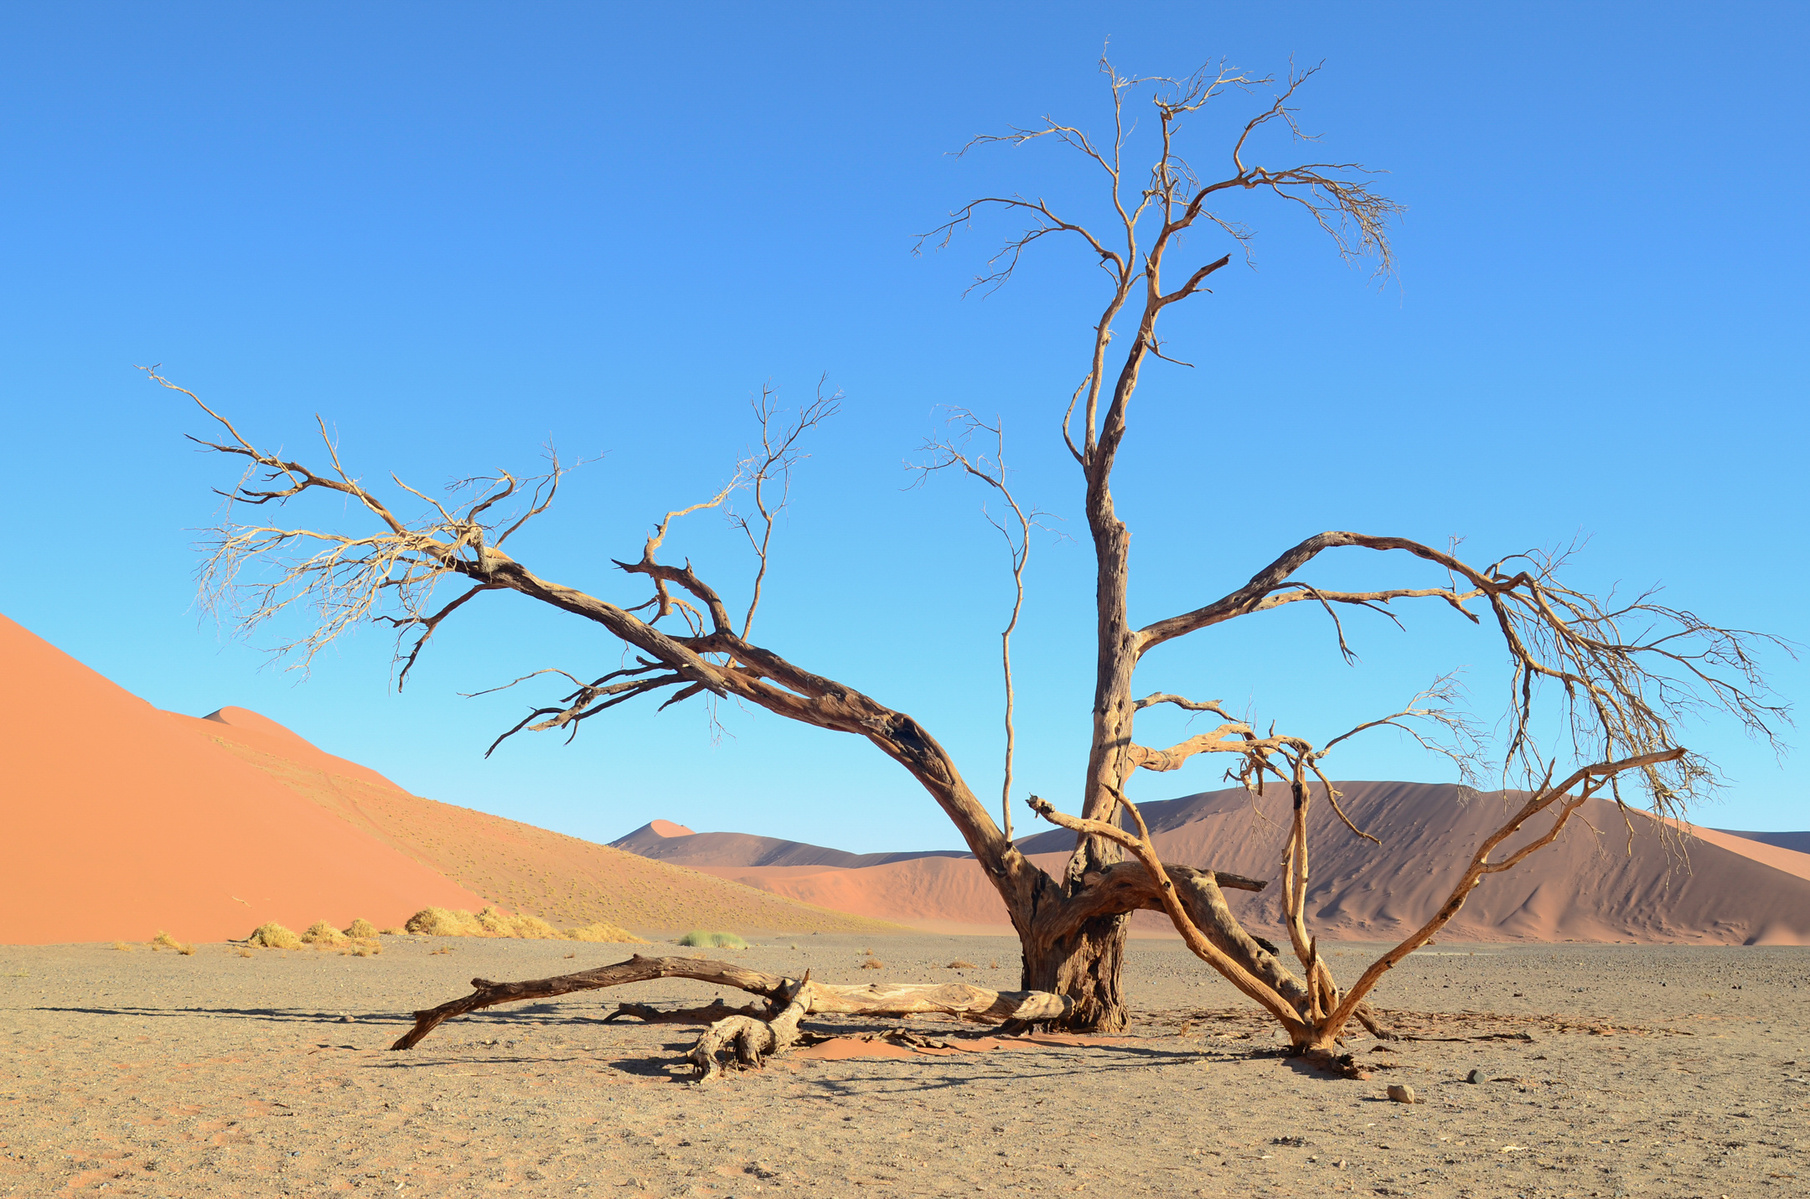 Desertscape and landscape photograph, created in the Namib desert. Desertscape at Dune 45 in Namibia. Trees in the desert. 